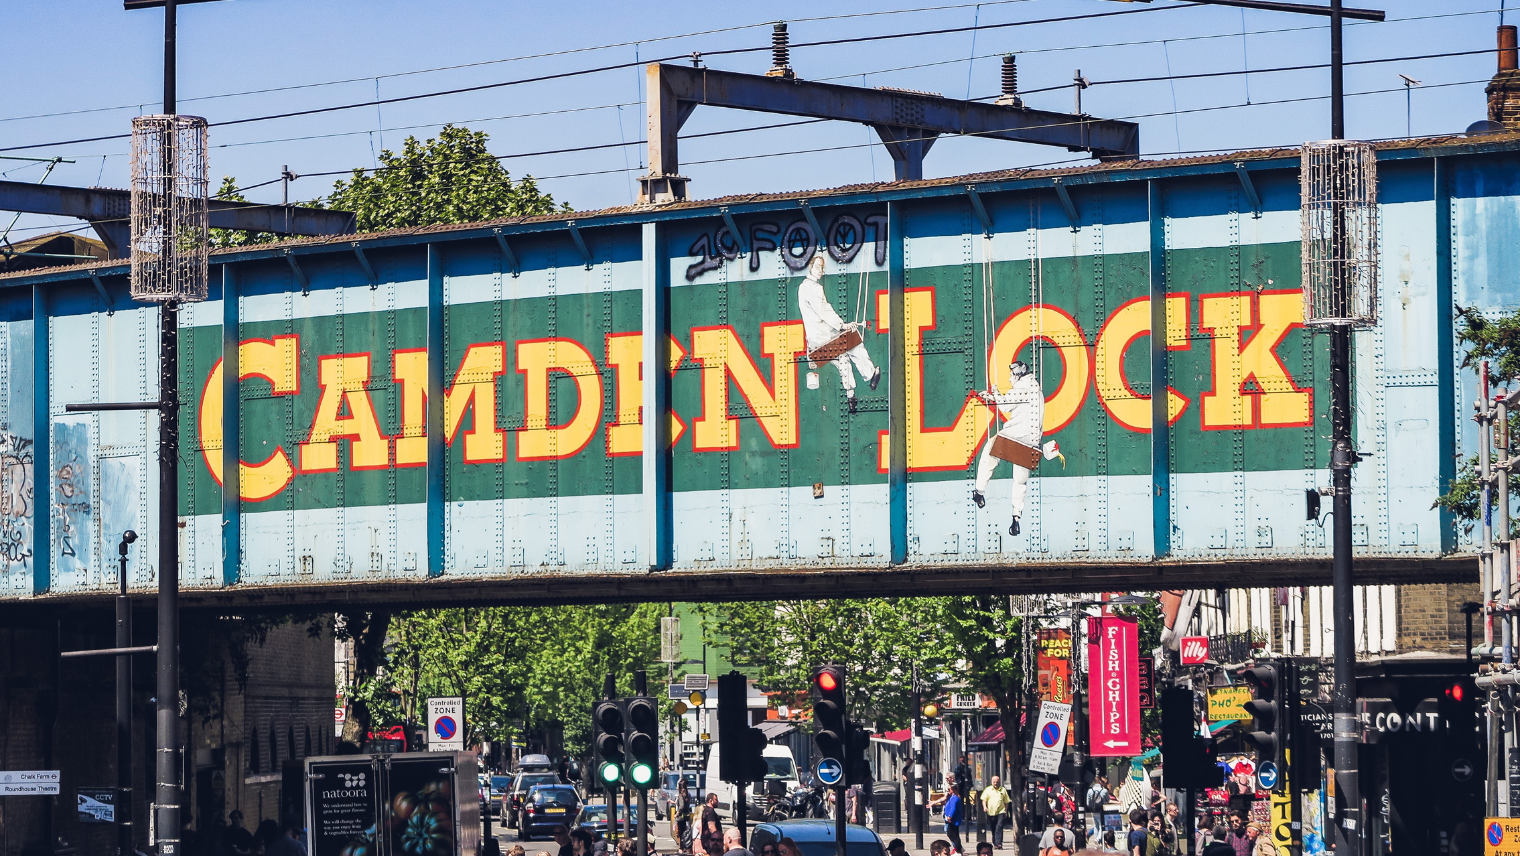 Camden Lock sign with people surrounding the streets in front of it